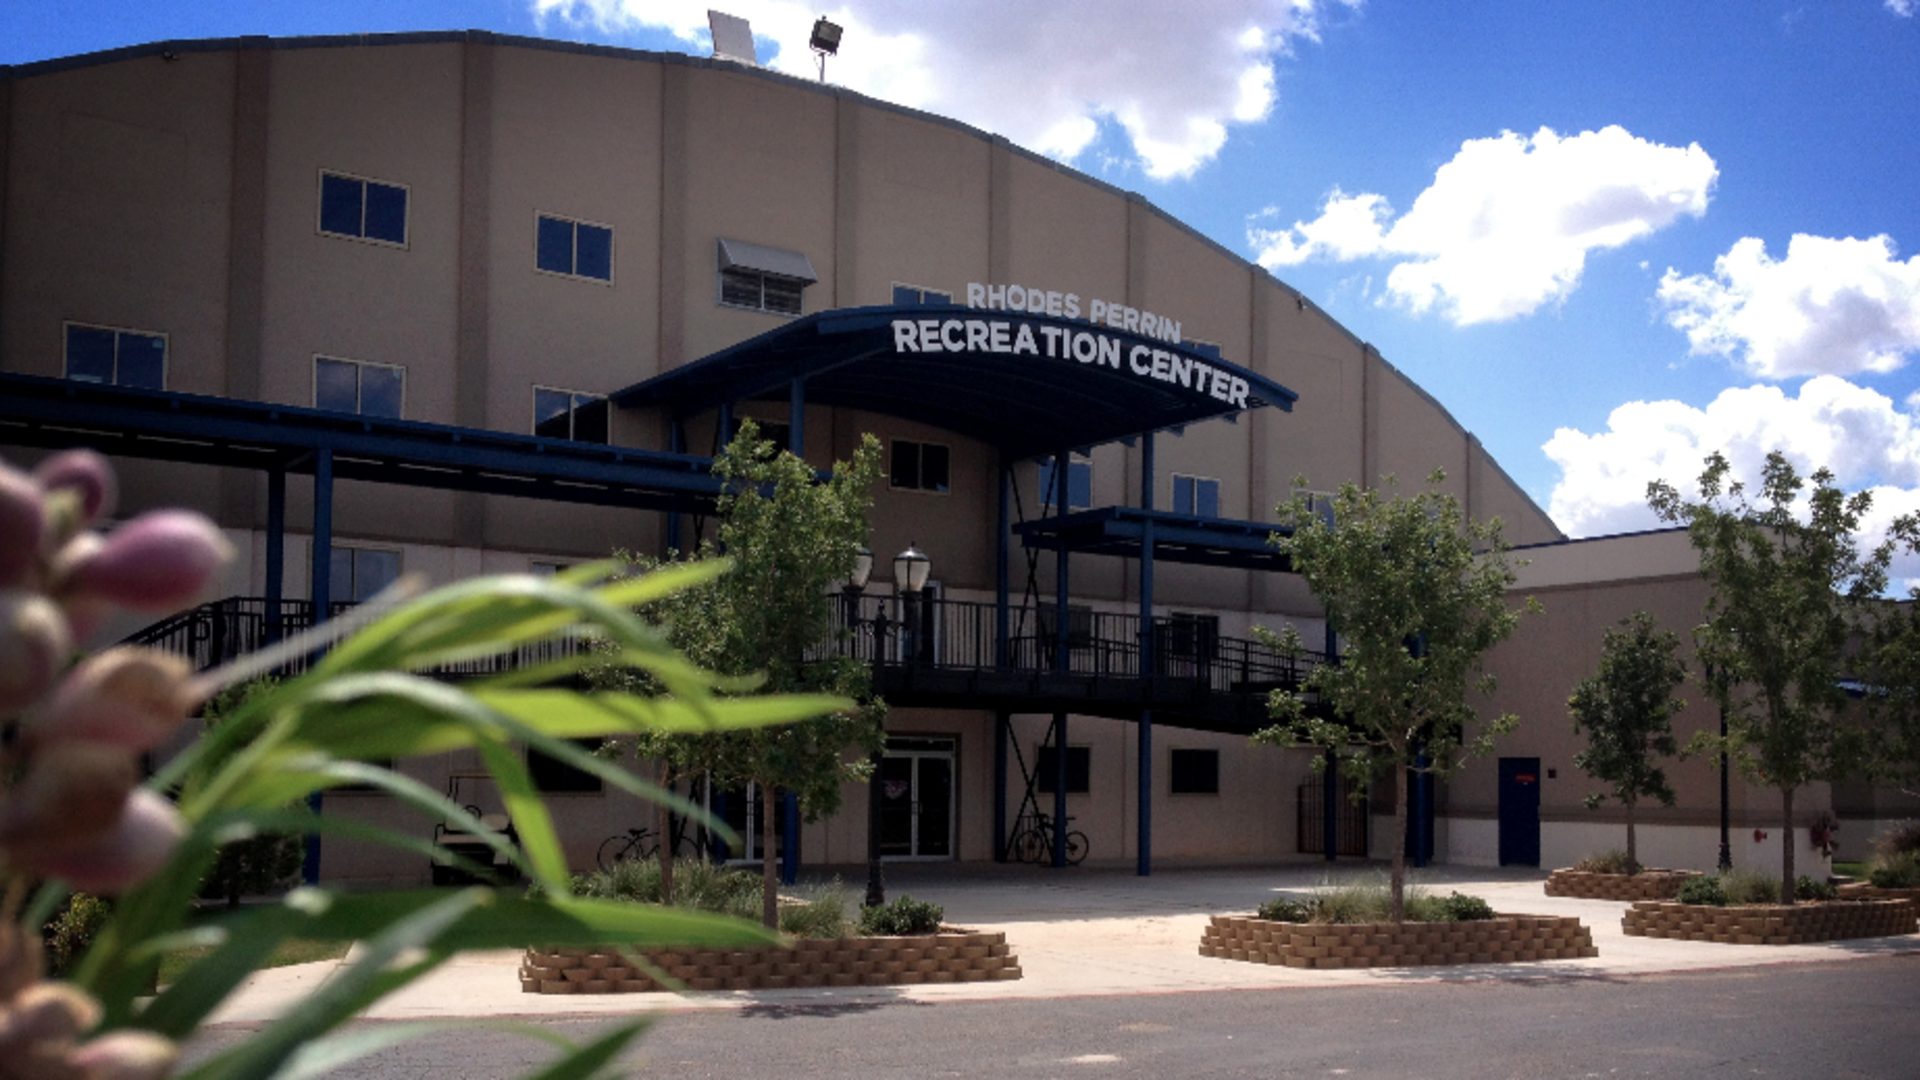 photo of the exterior of the Rhodes Perrin Recreation Center